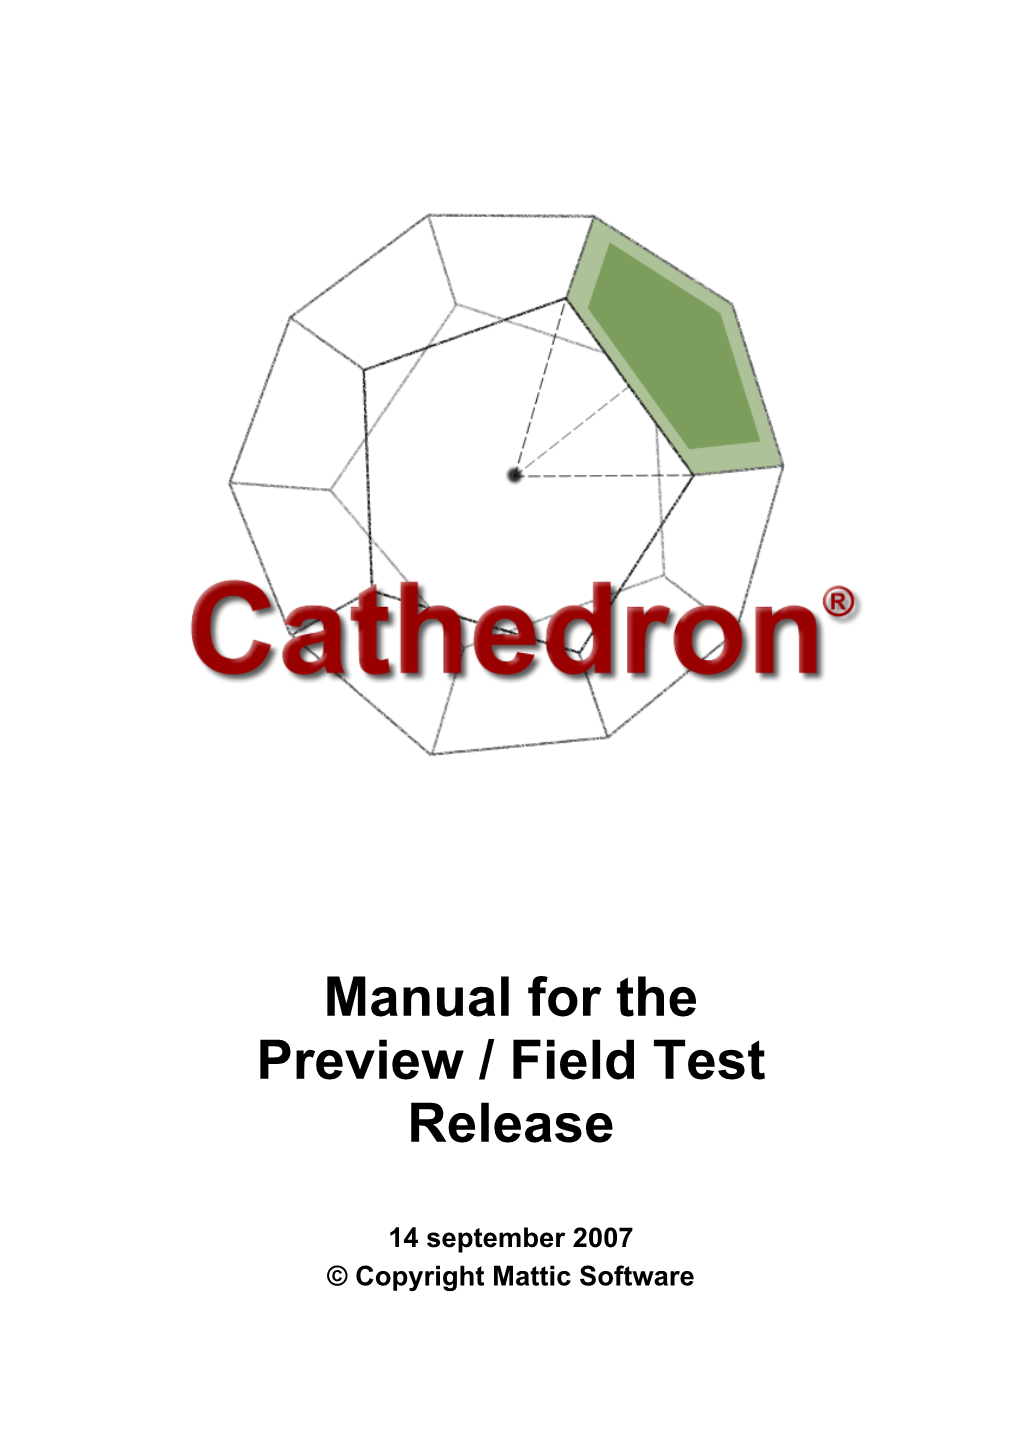 Cathedron Manual